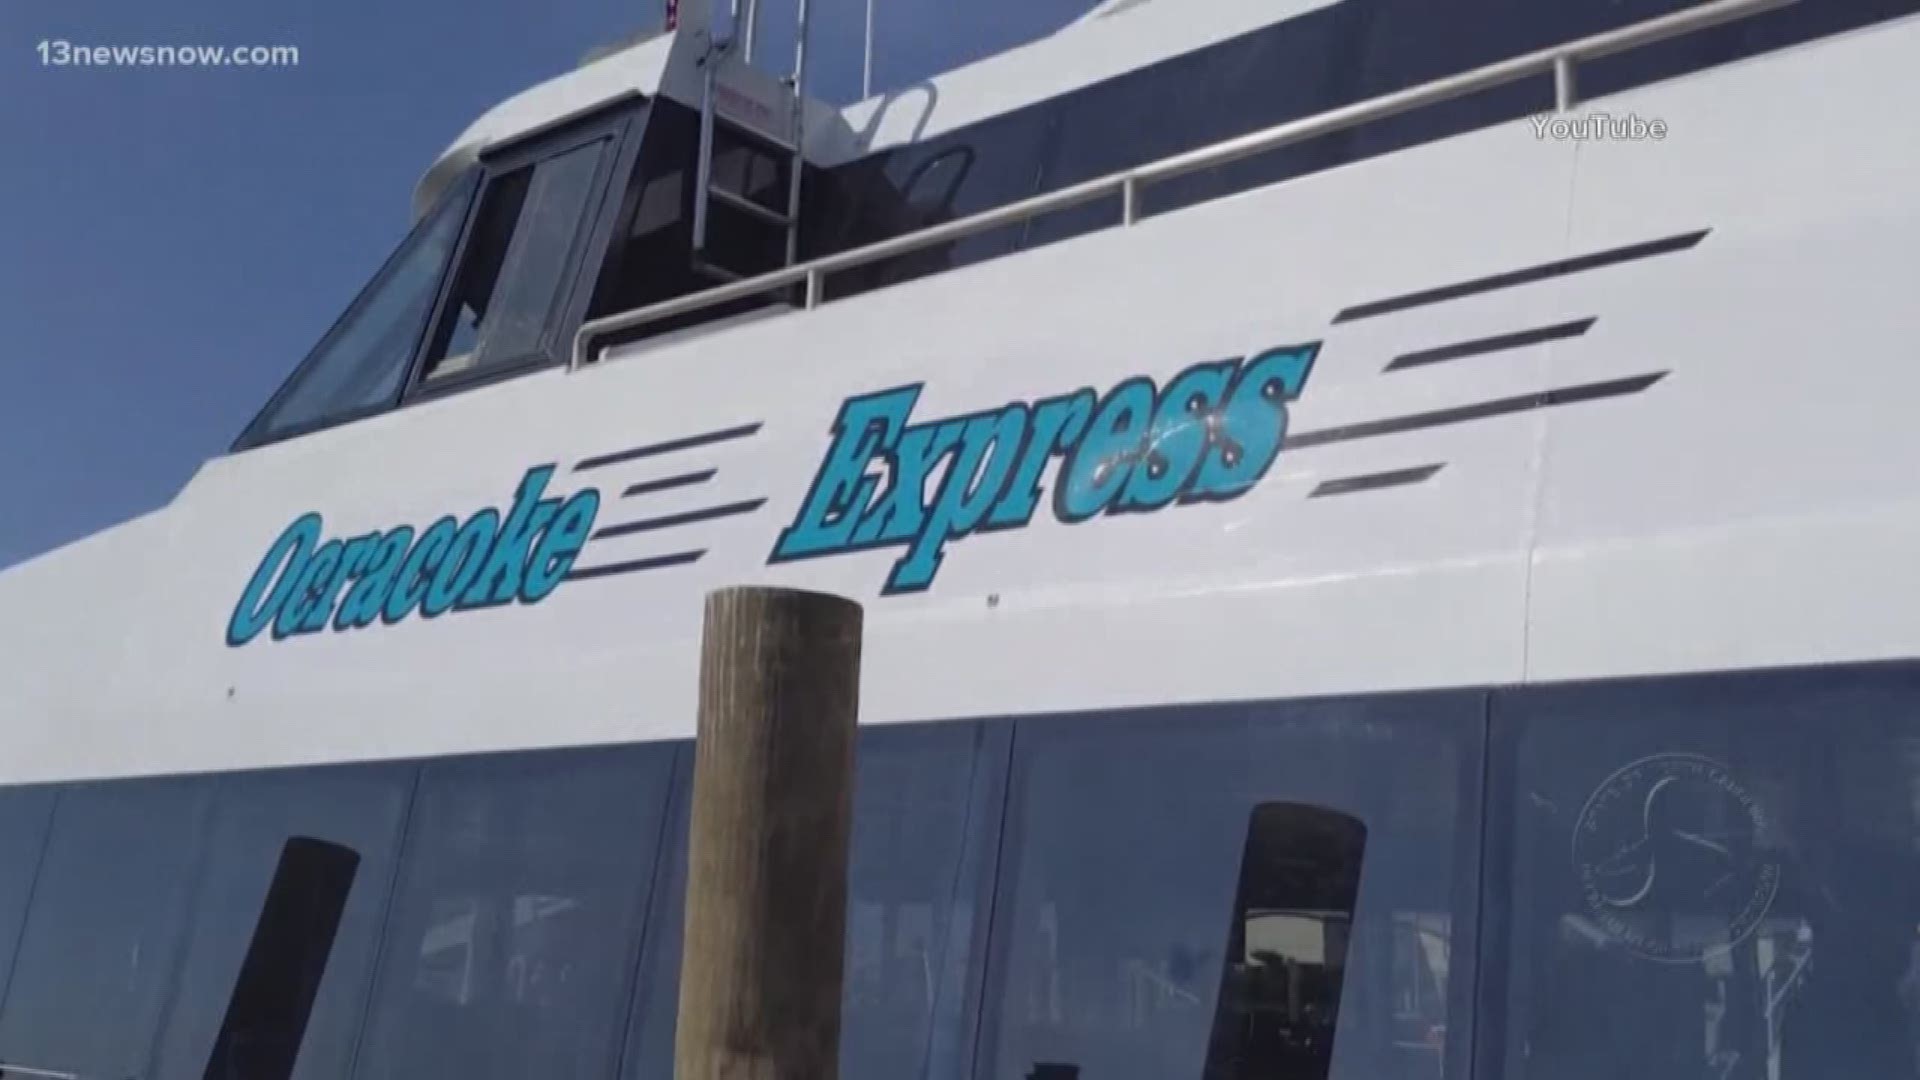 Ocracoke Express ferry service on Outer Banks extended